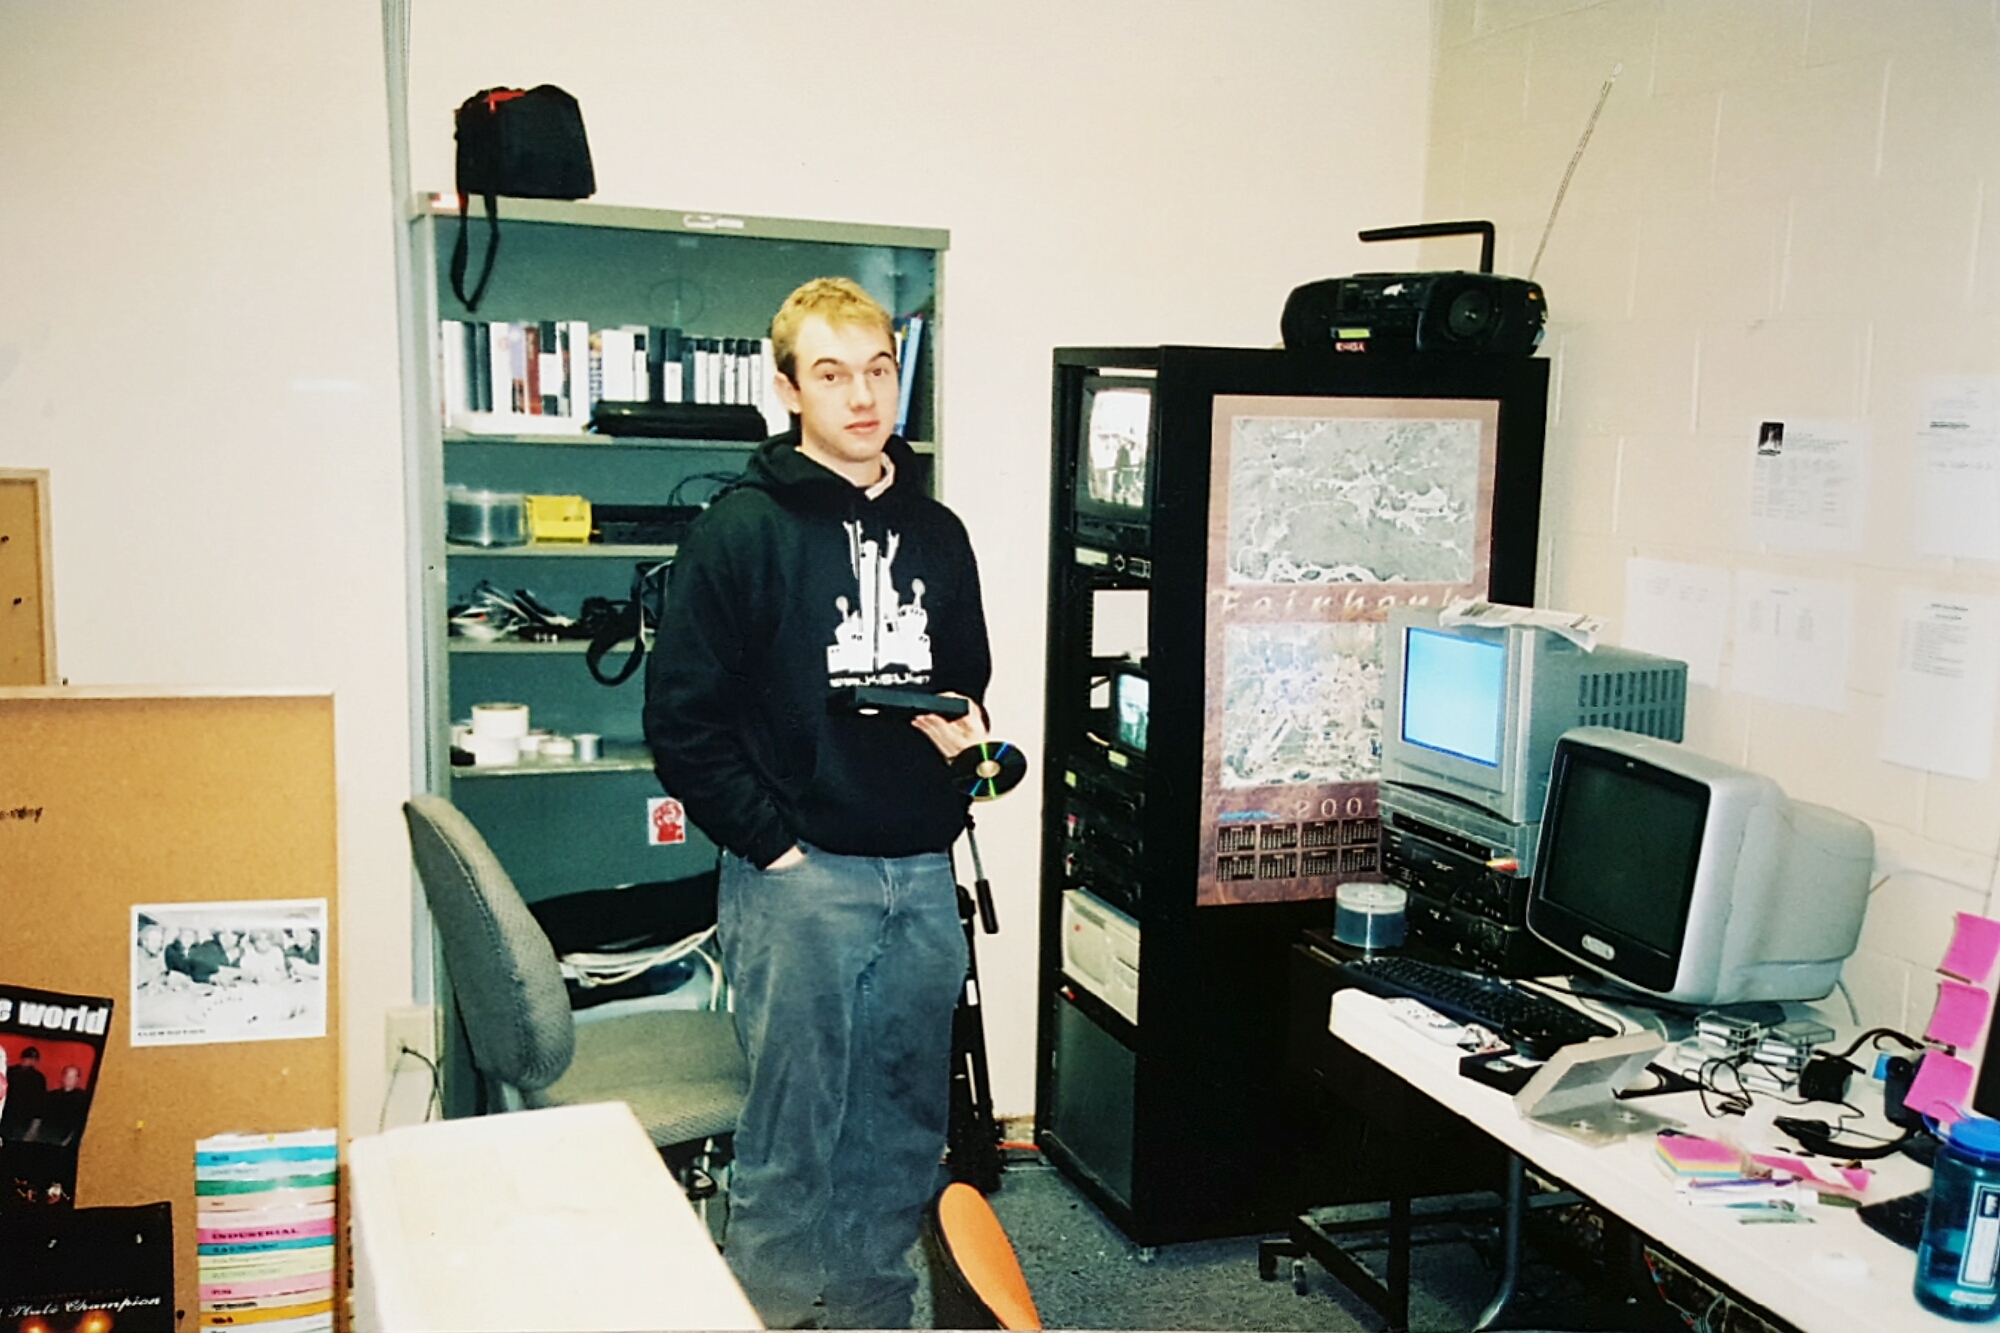 Sean circa 2006 as a Student Program Manager in the KSUA-TV offices in Constitution Hall